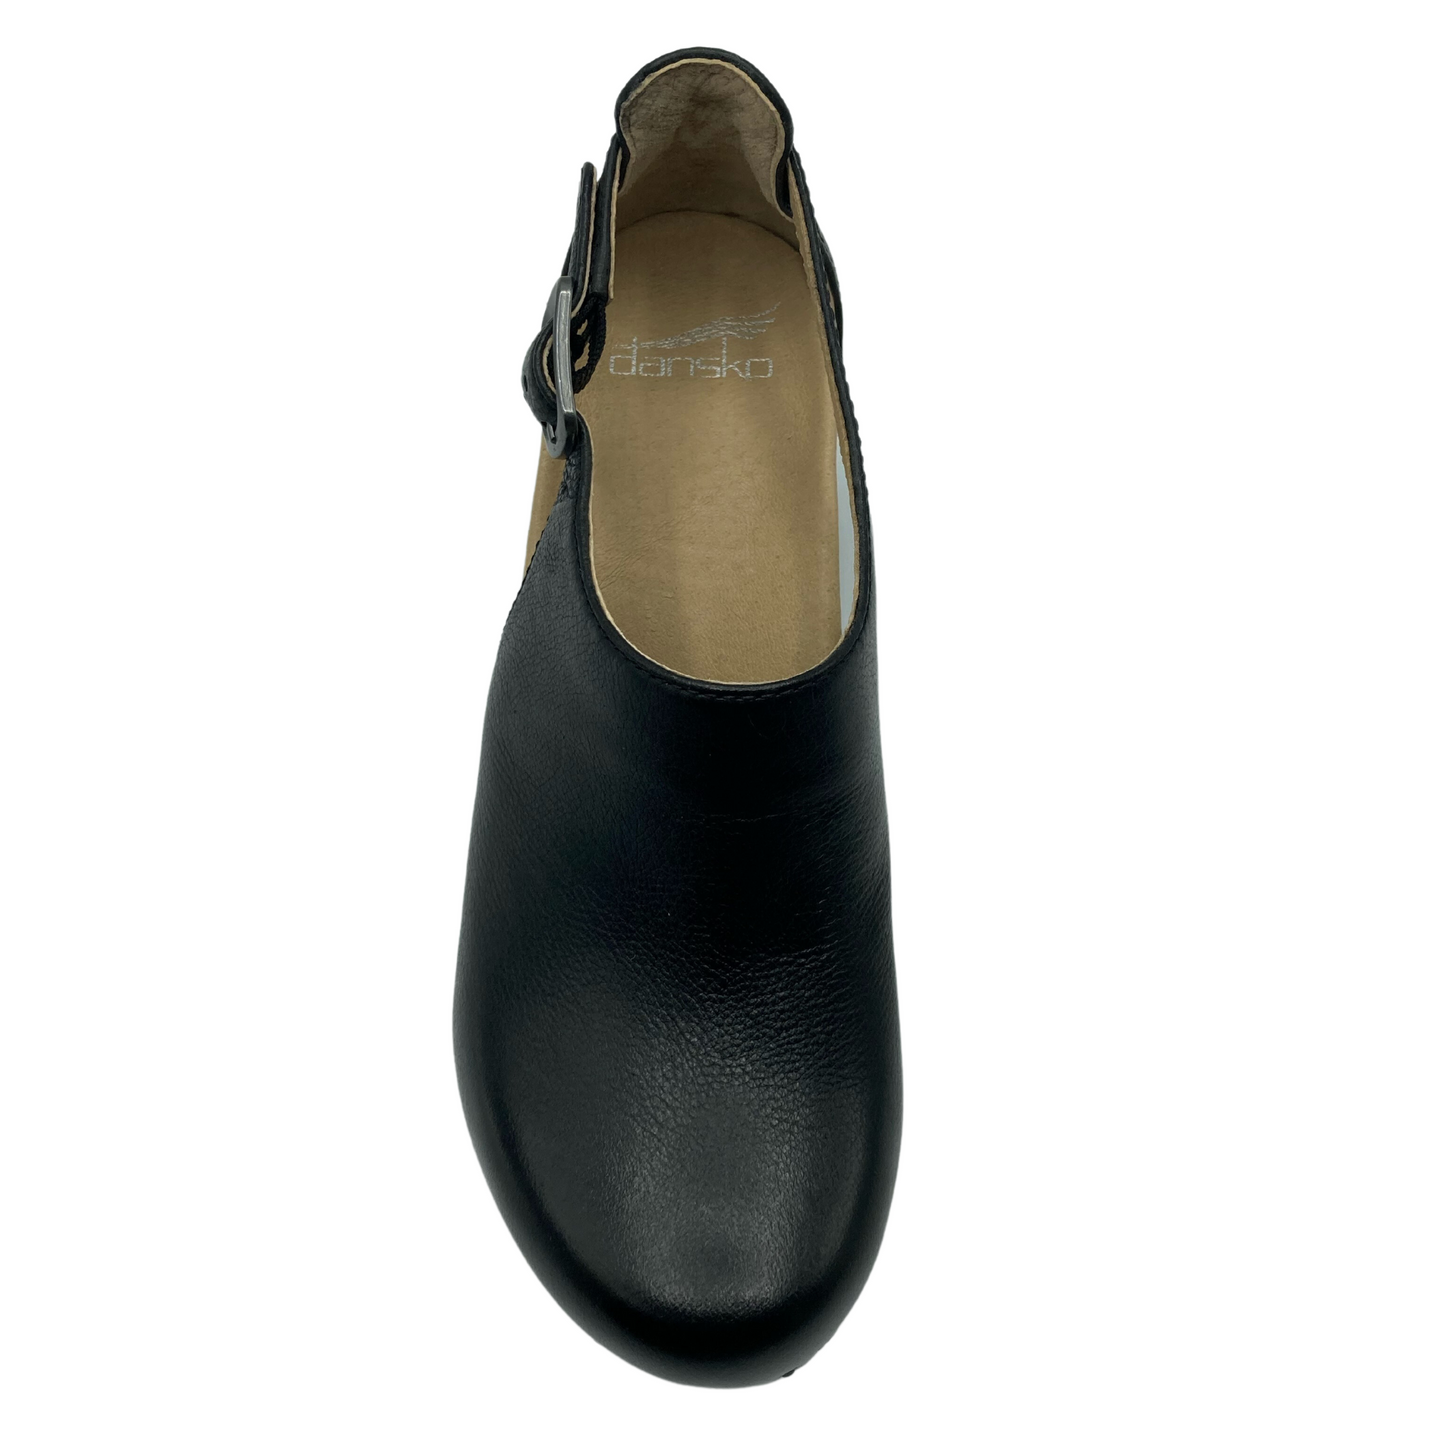 Top view of black leather clog with tan leather insole and rounded toe